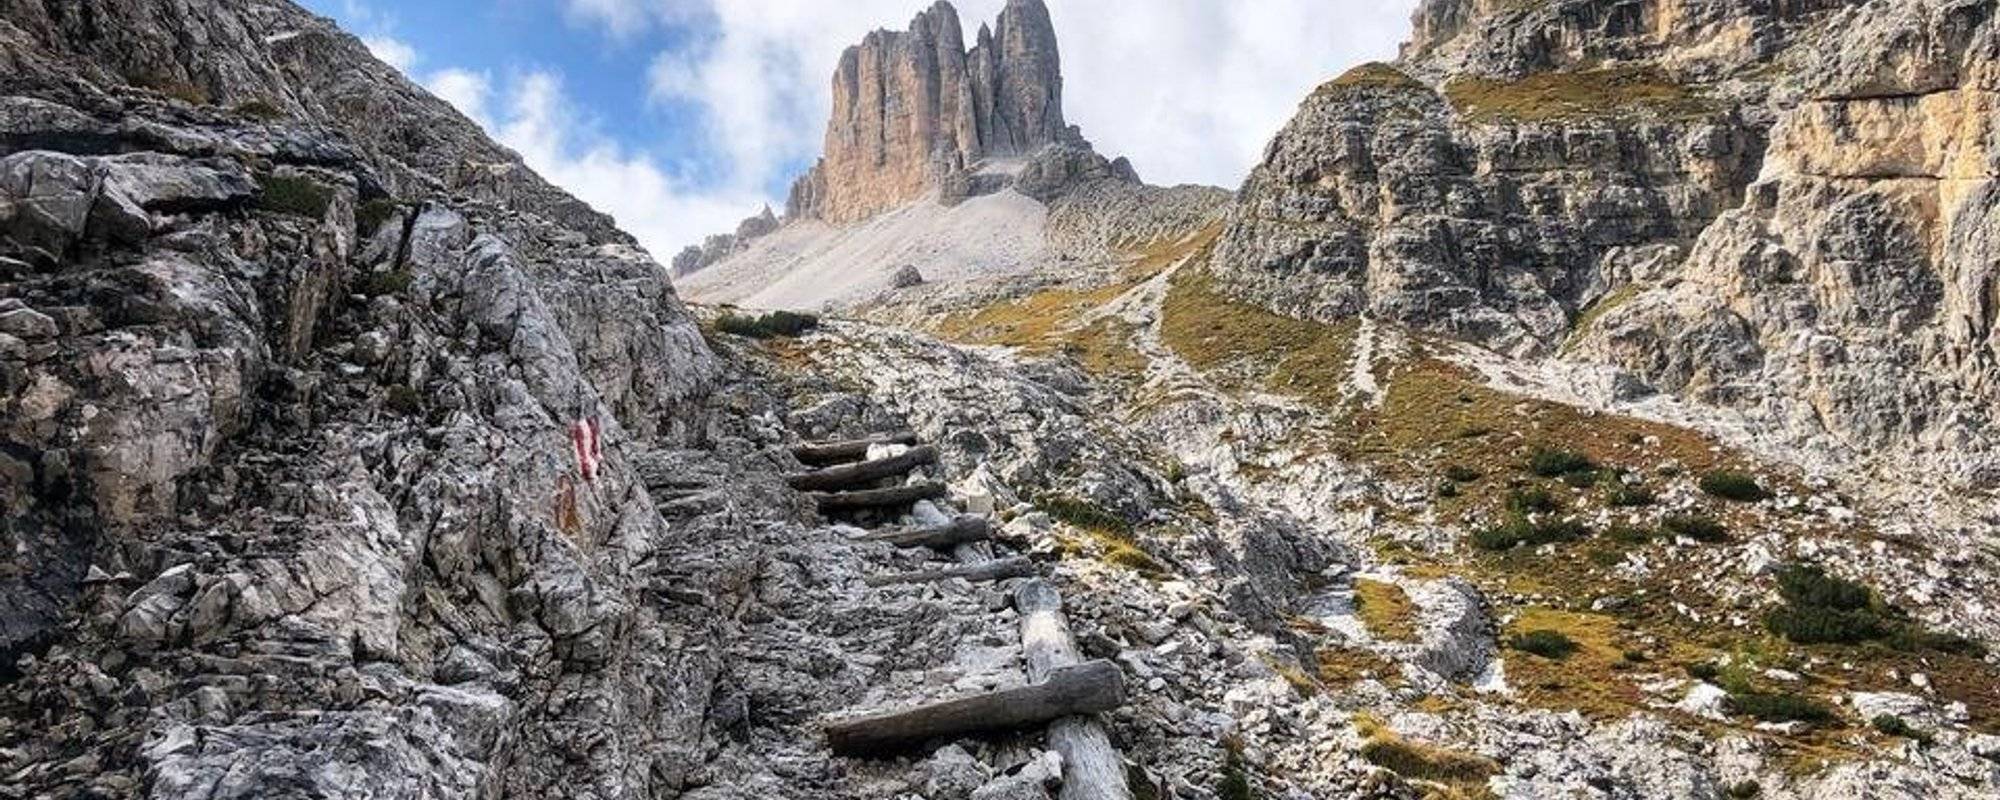 Hiking in the Dolomites - Between Paradise and World War I! - Part 2